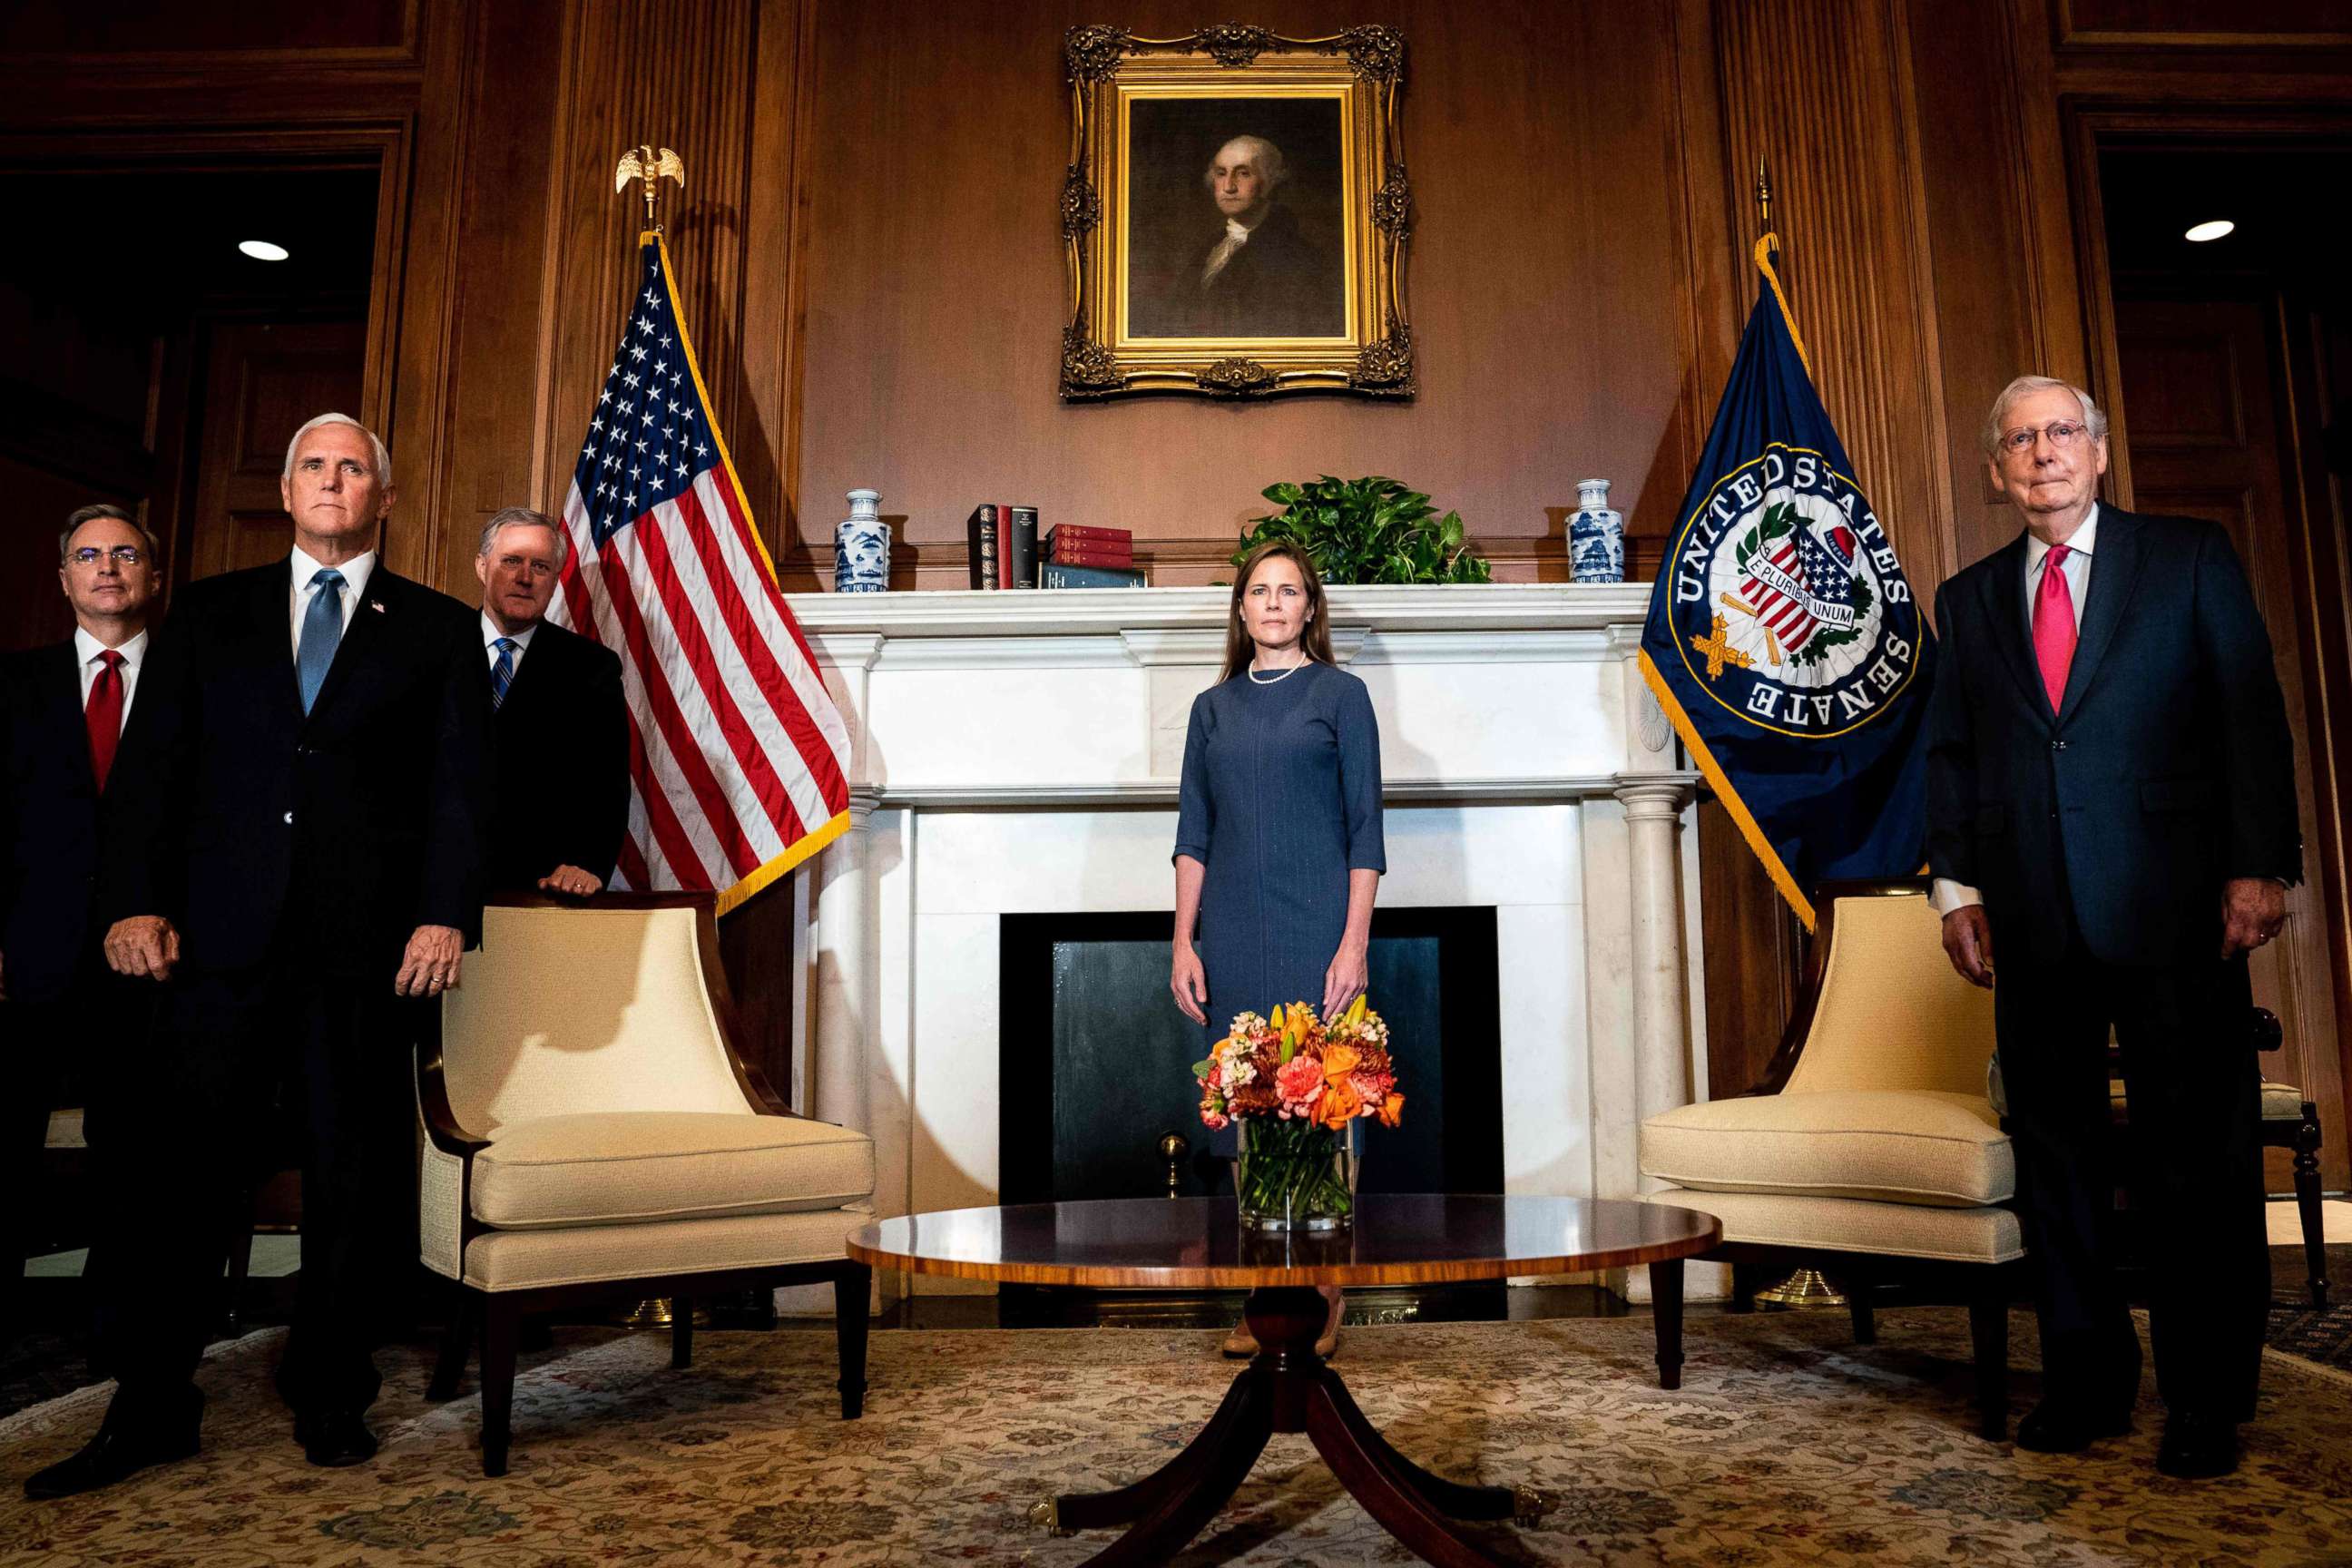 PHOTO: Judge Amy Coney Barrett, President Donald Trump's nominee to the Supreme Court, meets with Senate Majority Leader Mitch McConnell and Vice President Mike Pence in the Capitol in Washington, on Sept. 29, 2020. 